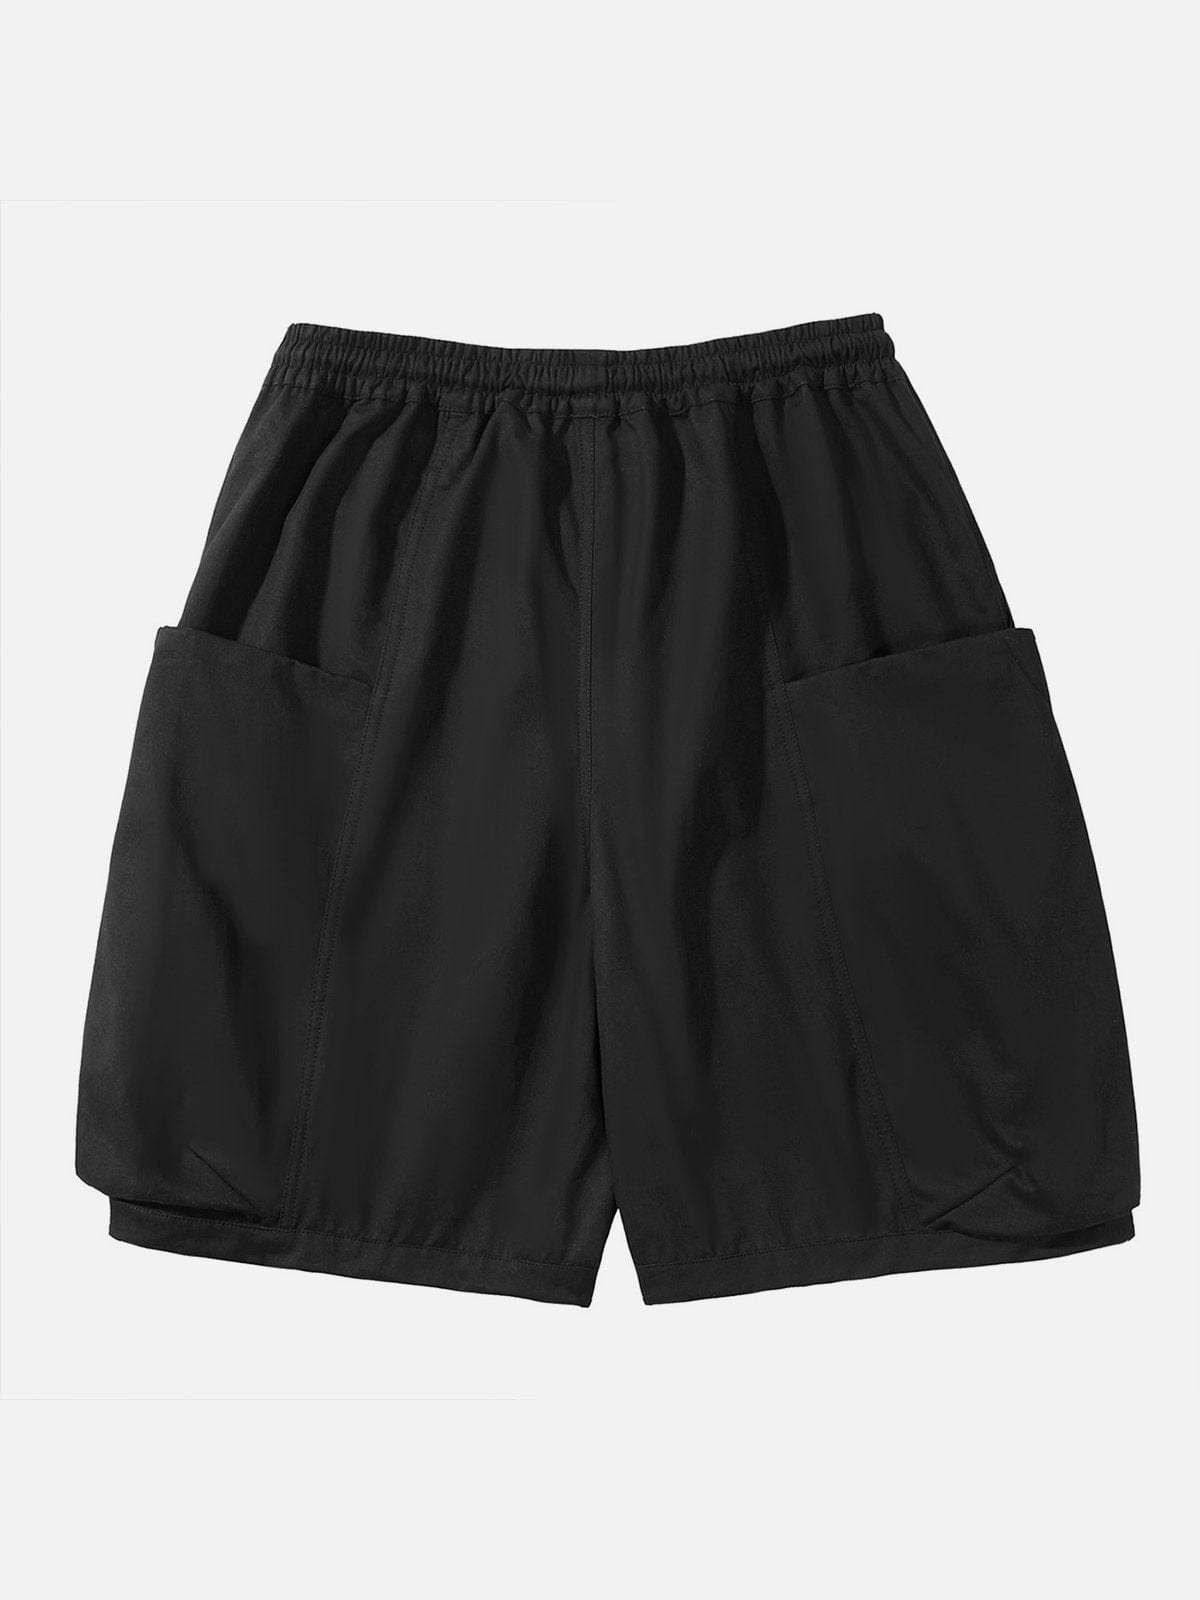 Pockets Embroidery Shorts Streetwear Brand Techwear Combat Tactical YUGEN THEORY